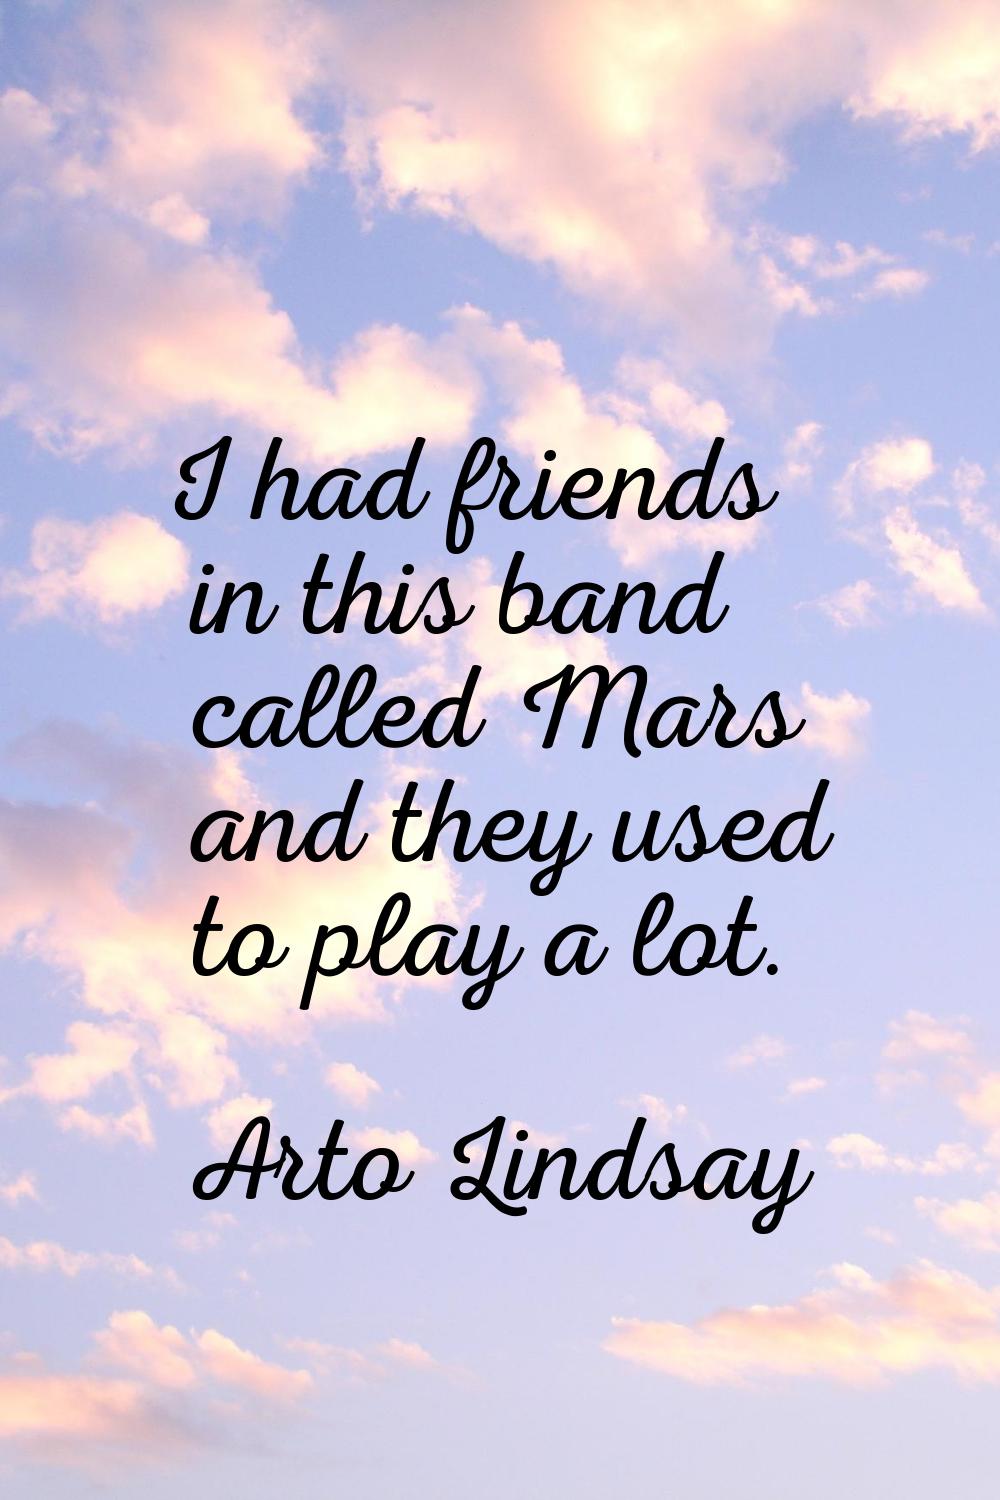 I had friends in this band called Mars and they used to play a lot.